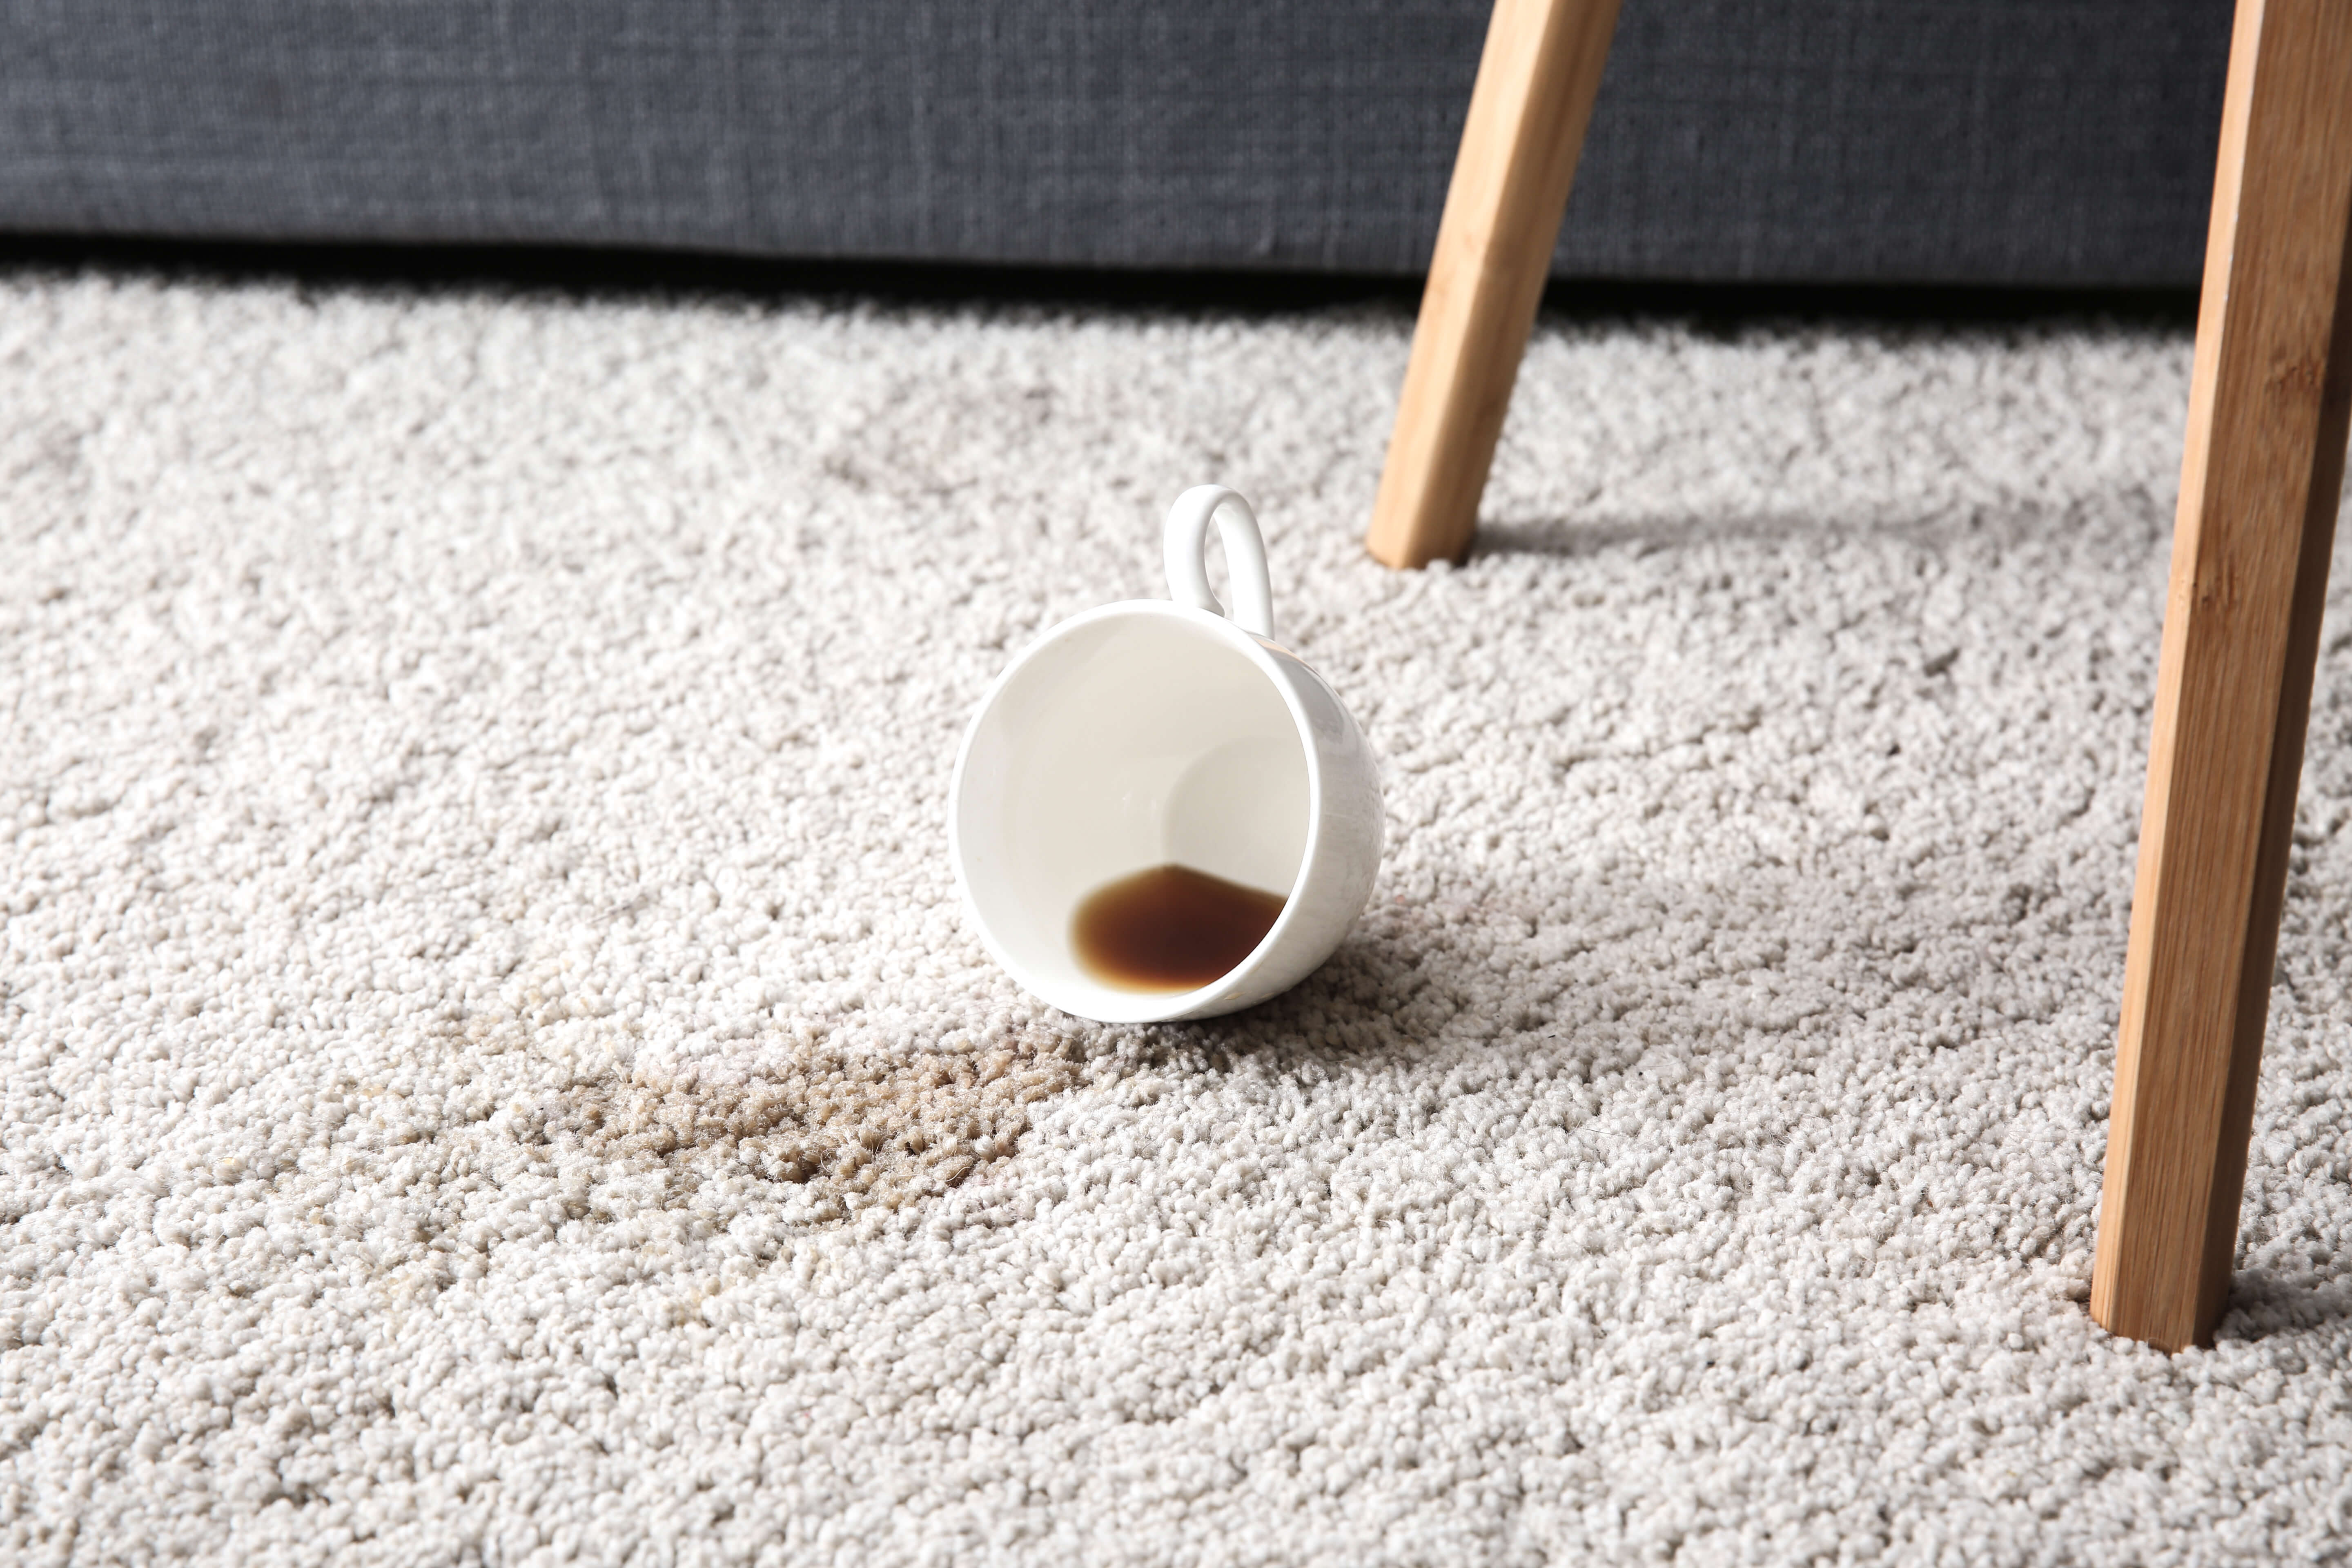 How to remove coffee stains from carpets, clothes, and more